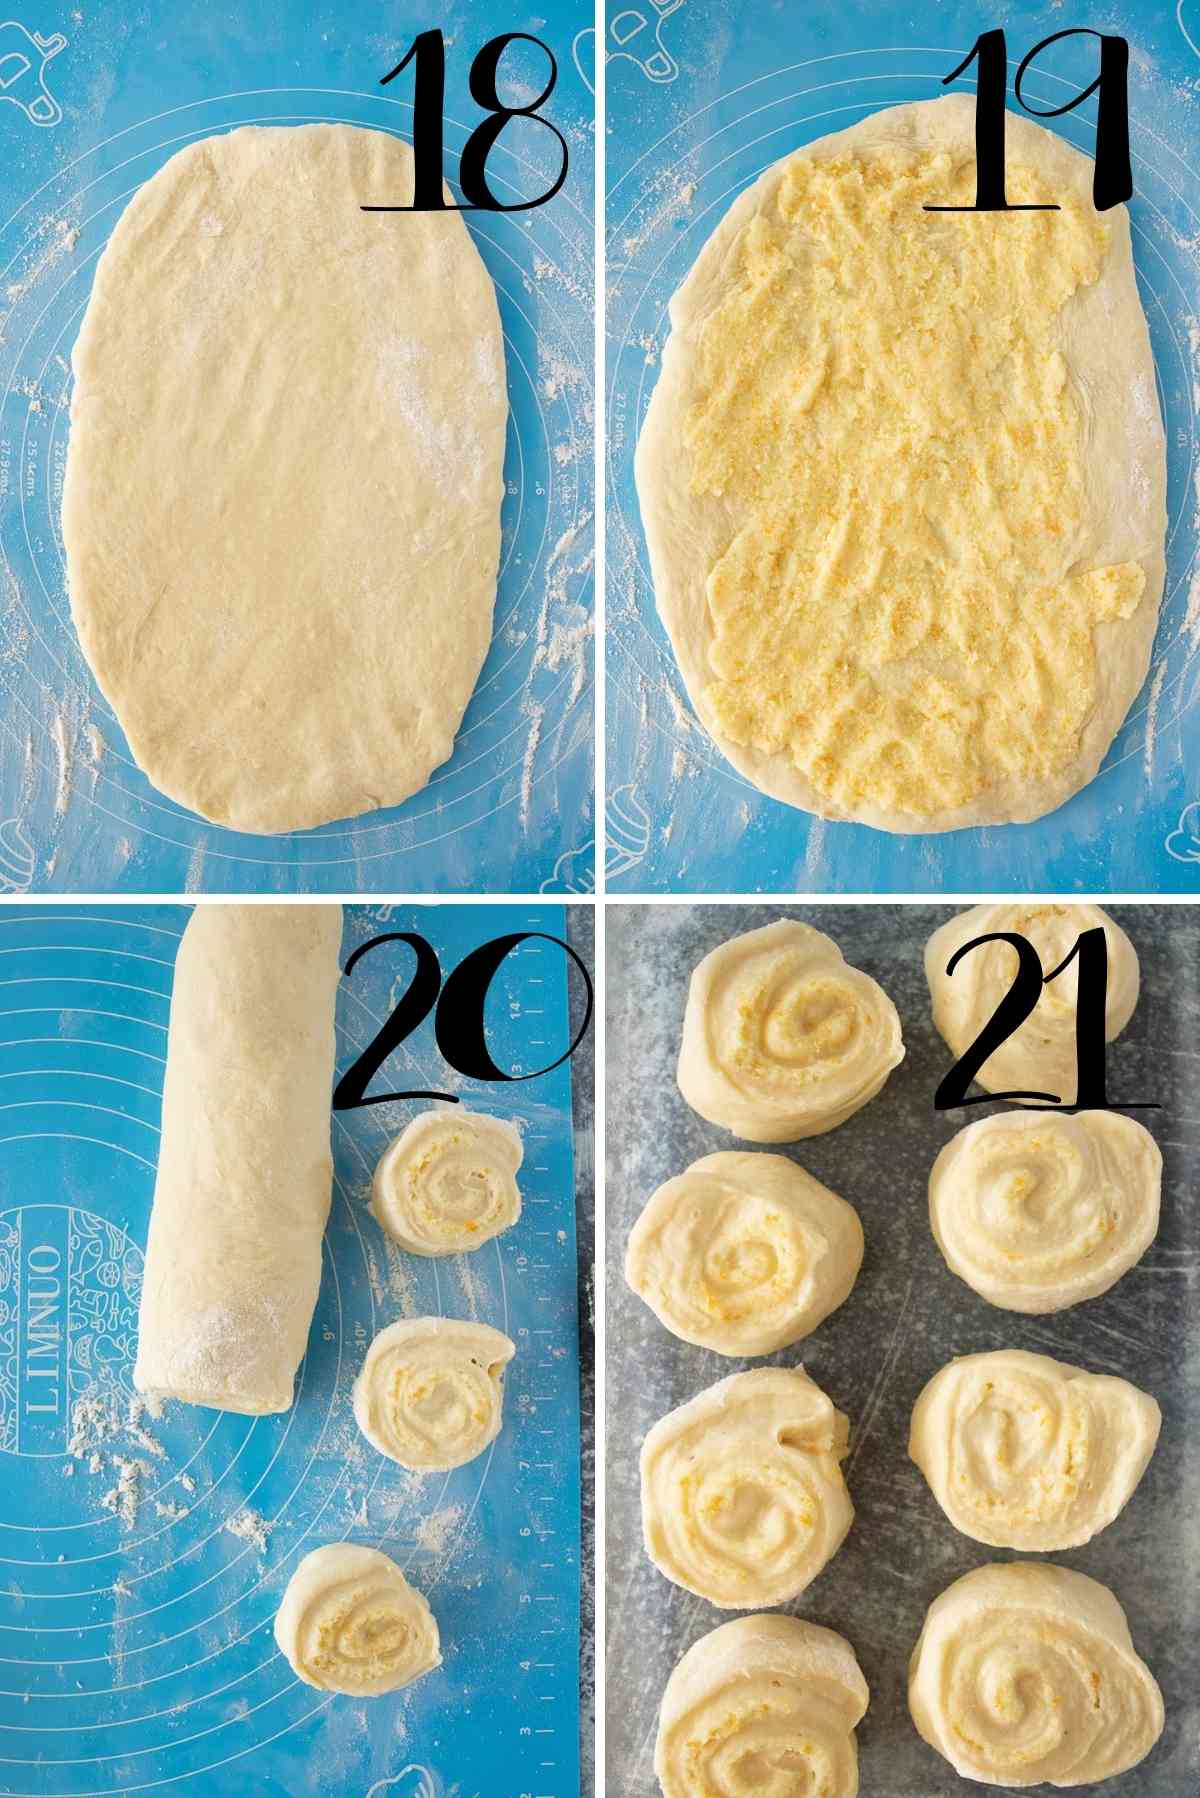 Dough rolled out, spread with filling, rolled up and sliced.